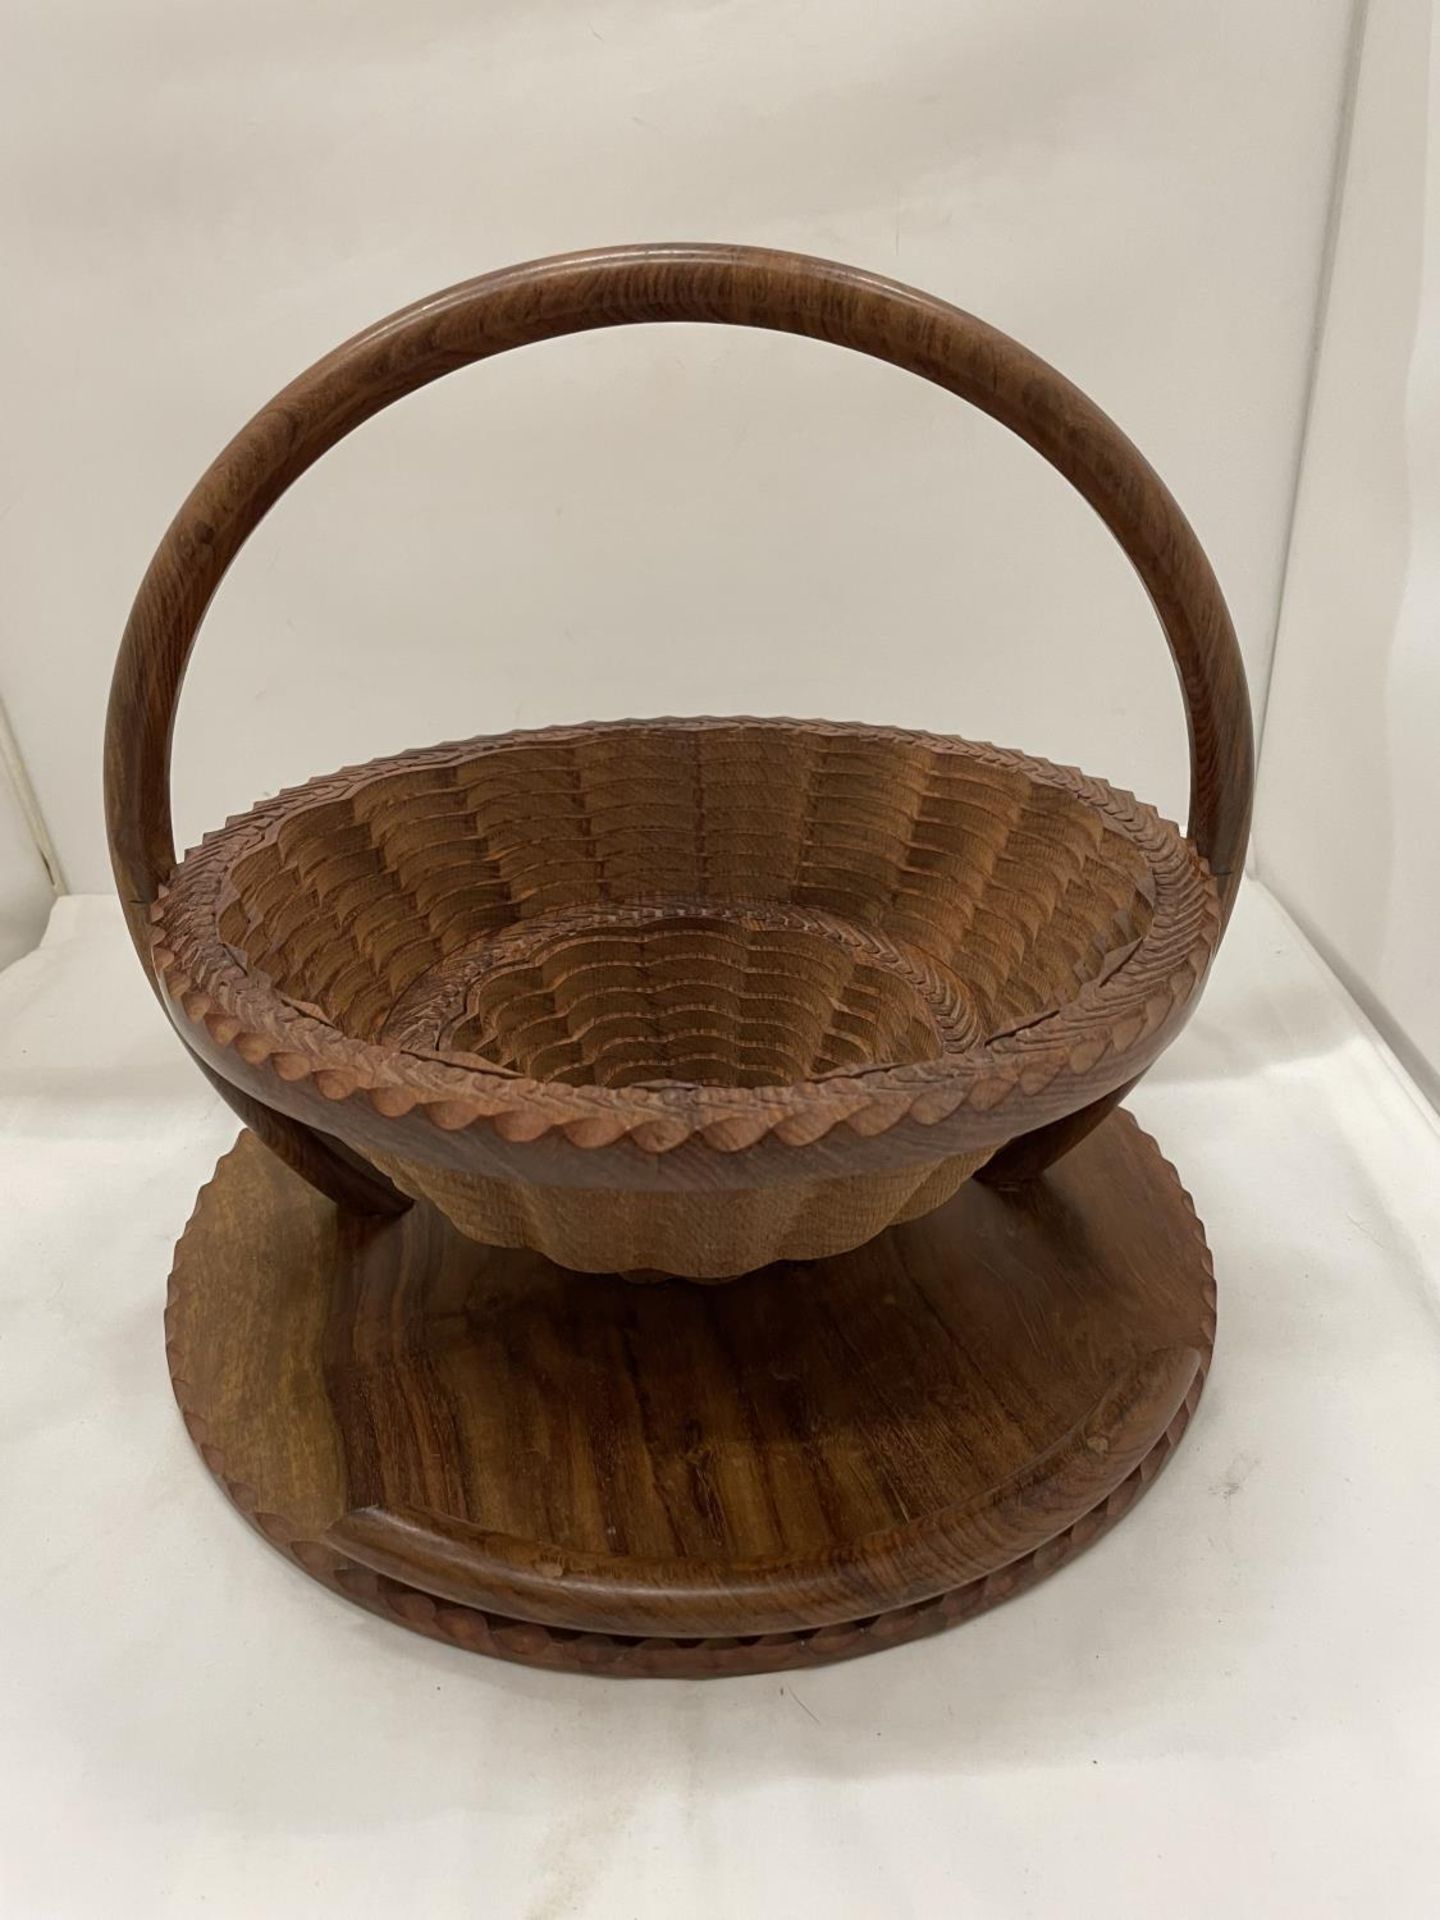 A METAMORPHIC WOODEN TRAY, PULL THE HANDLE UP AND IT BECOMES A BASKET - Image 3 of 6